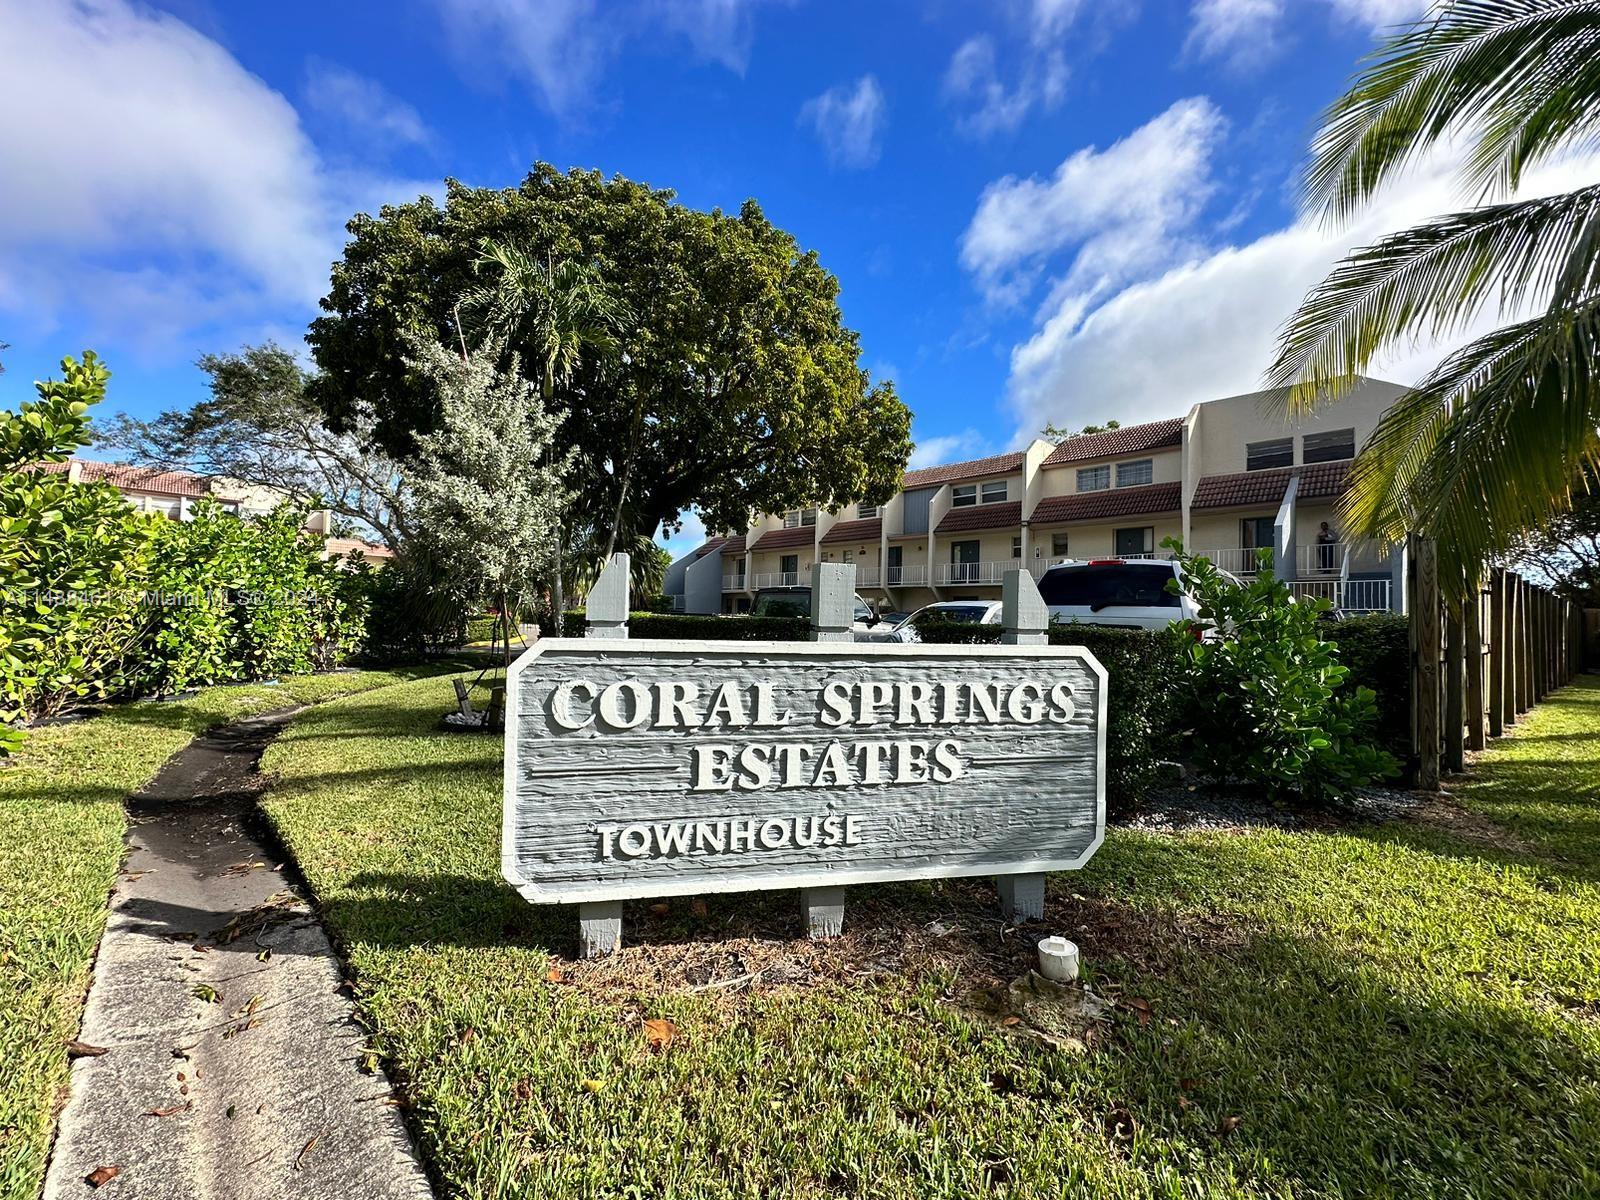 Property for Sale at 3751 Nw 115th Way 5-3, Coral Springs, Broward County, Florida - Bedrooms: 3 
Bathrooms: 3  - $245,000